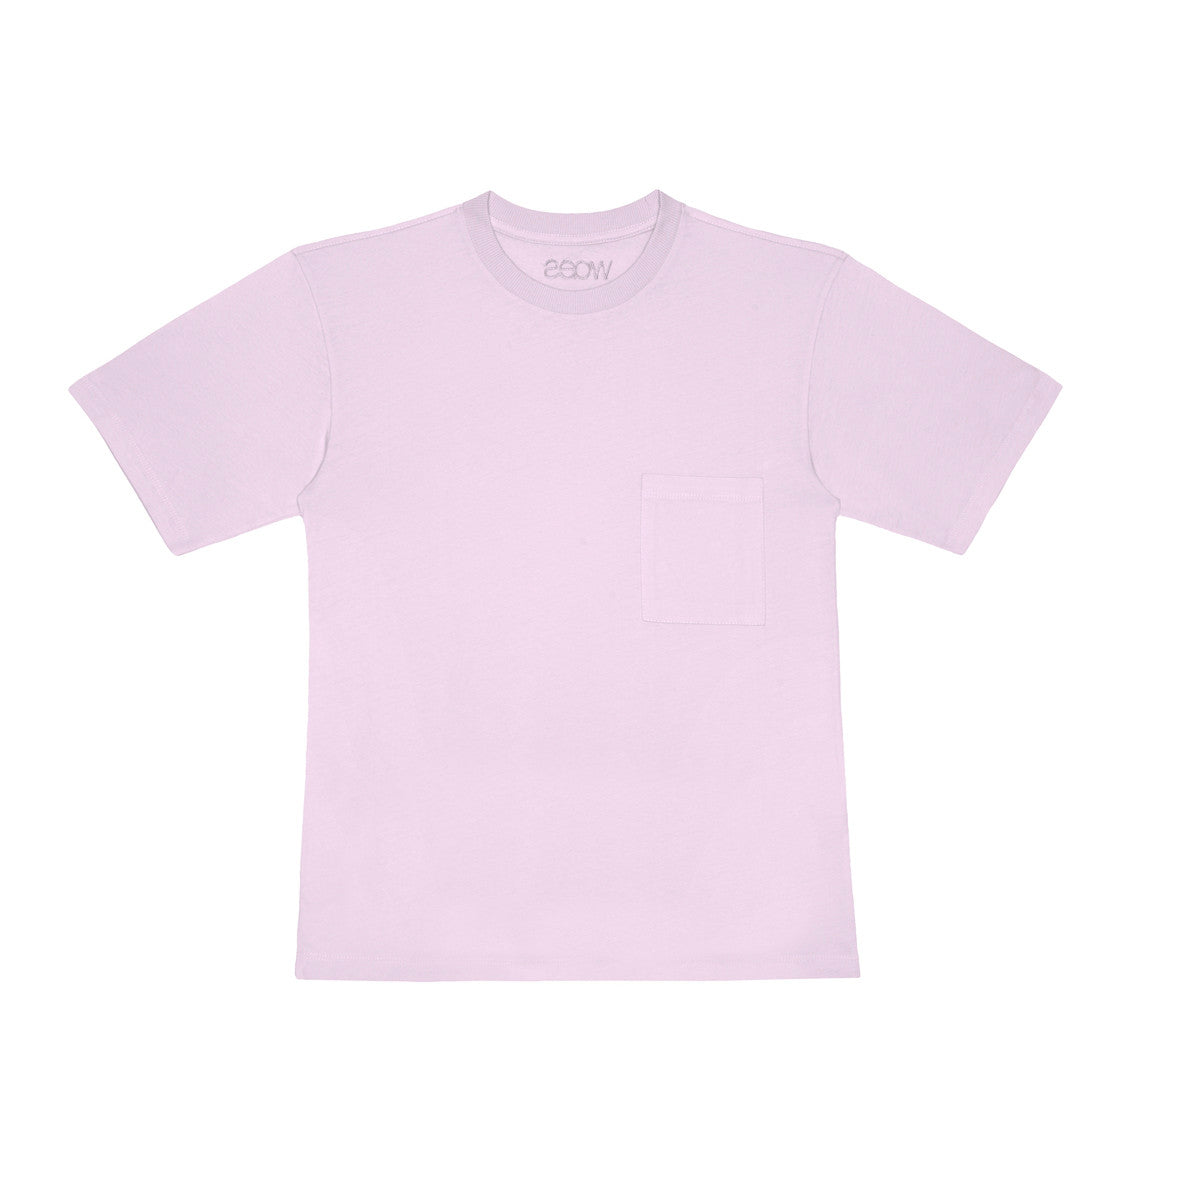 Our Little Hedonist round neck t-shirt in lavande is a populair essential. It has a relaxed-fit, has a pocket on the chest and is made from our premium organic cotton. The neckline is round and fitted, with short sleeves. It has bit oversized look.